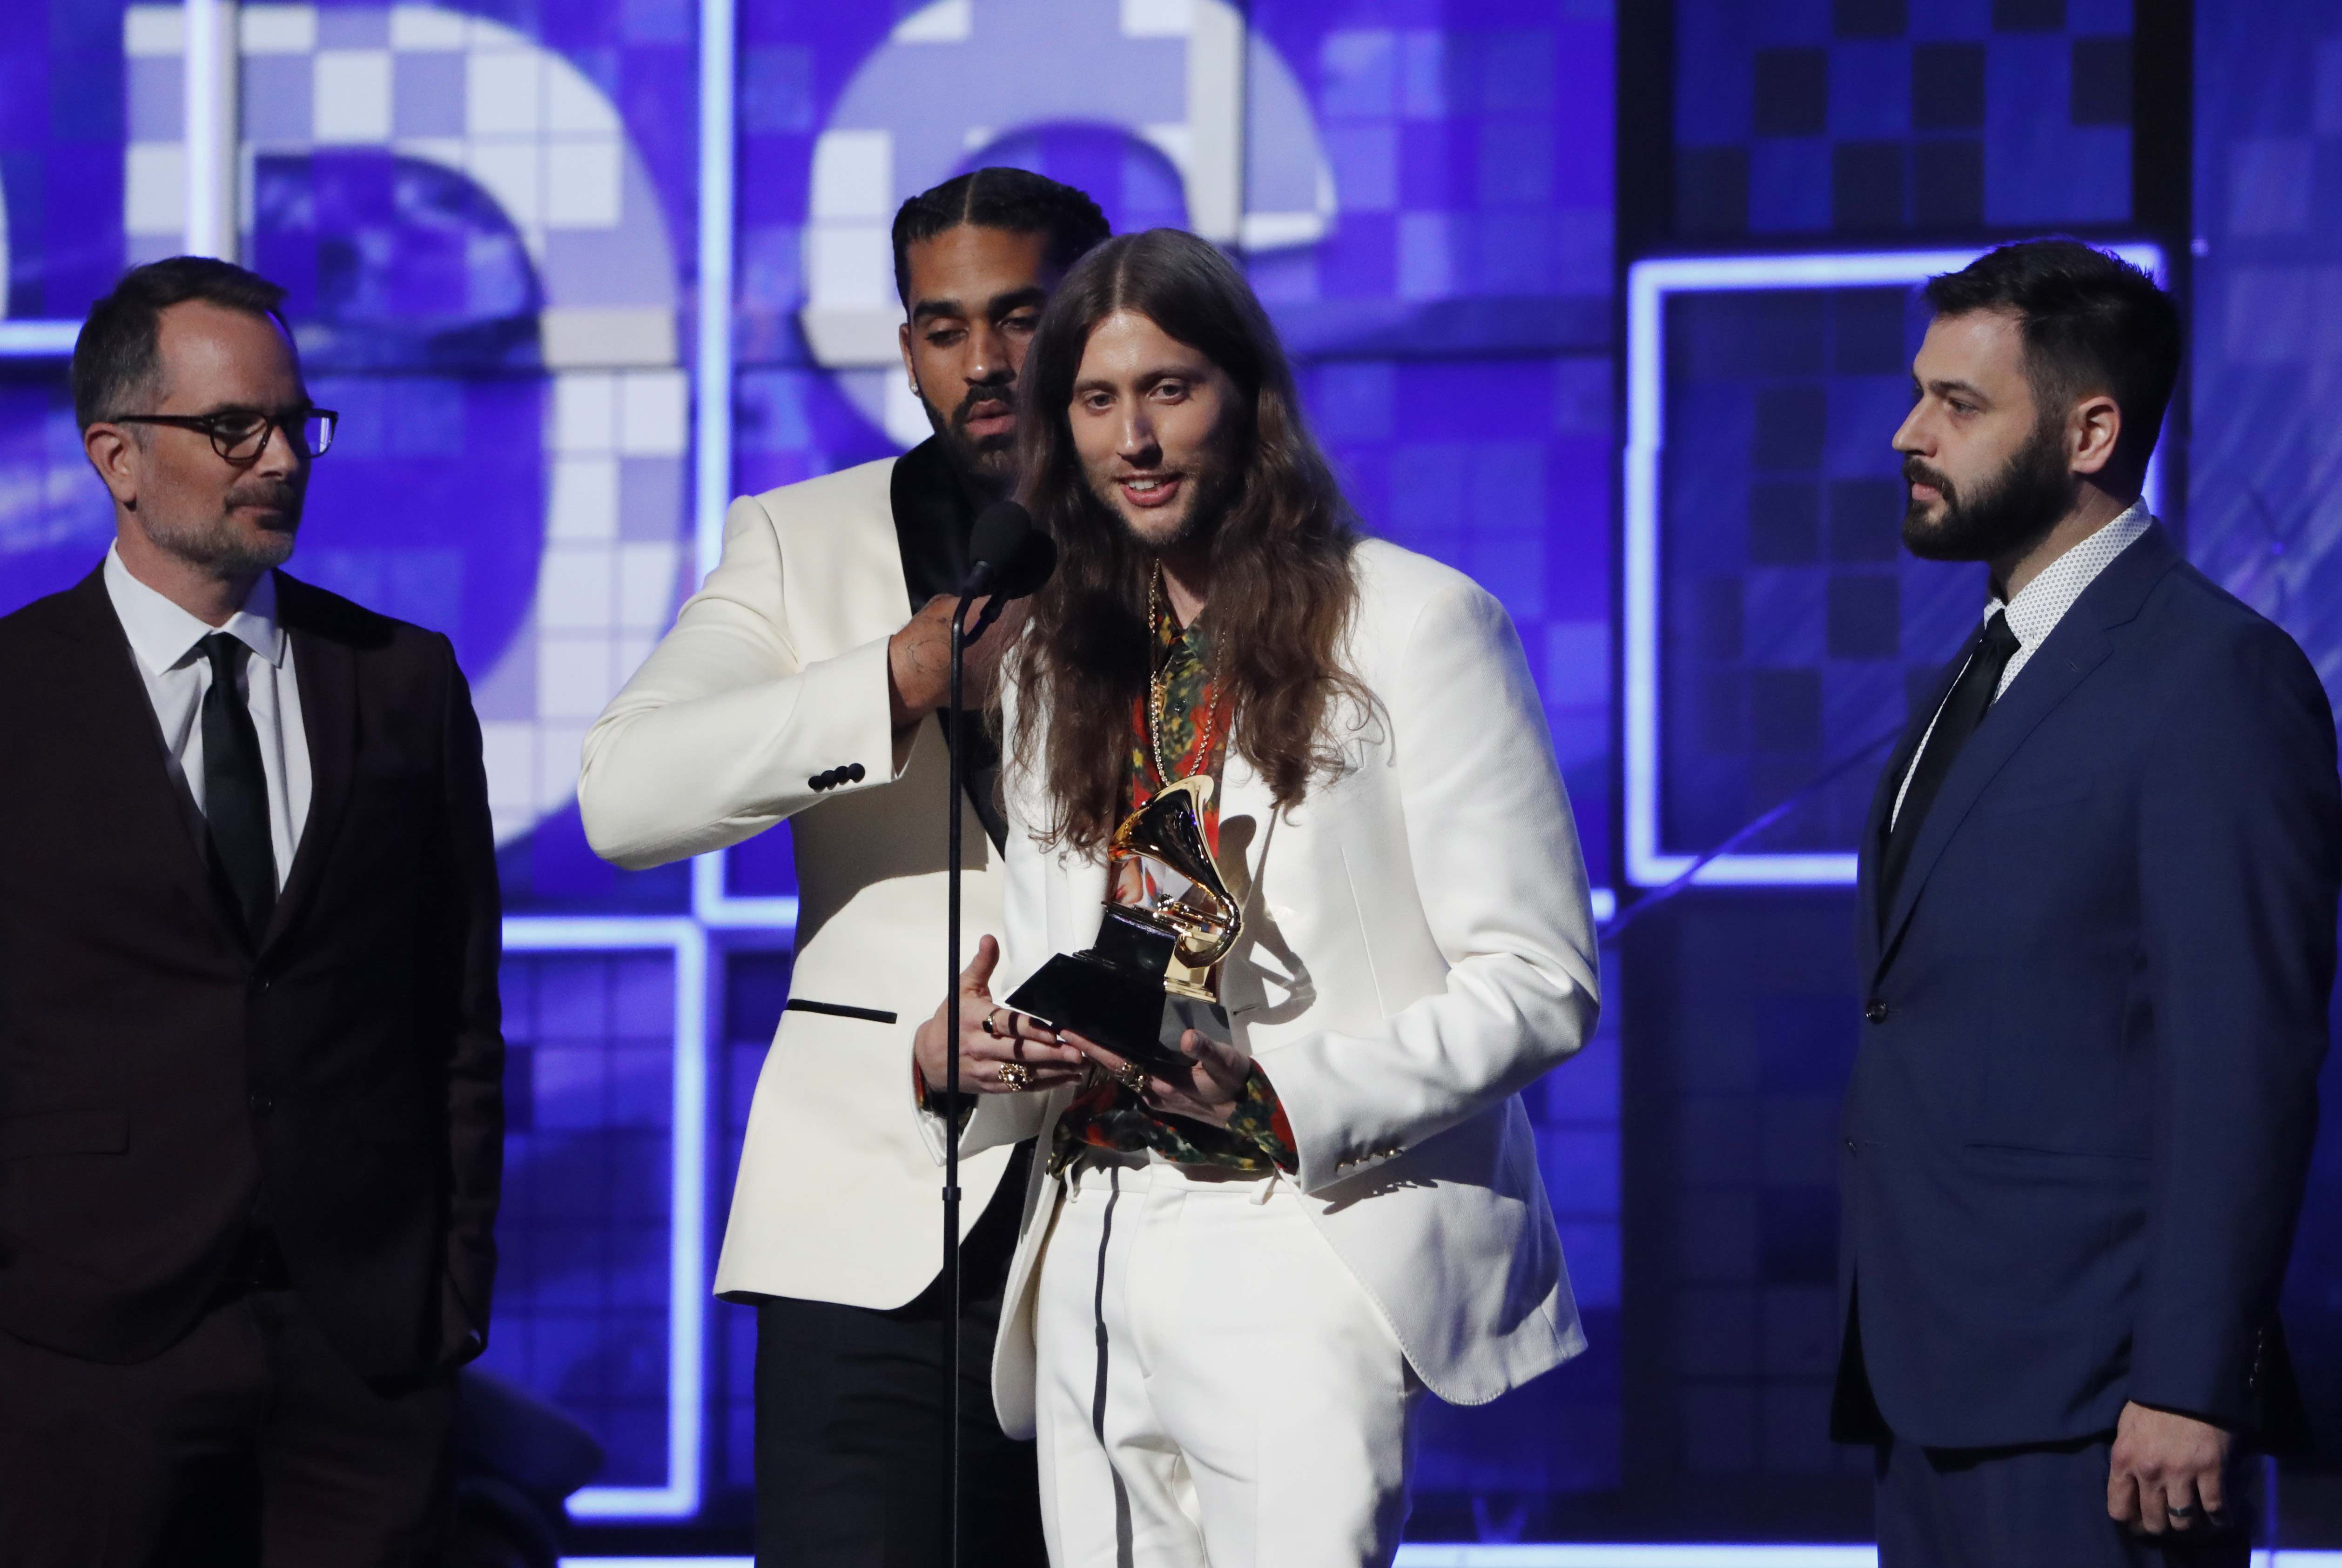 'This is America' wins big at Grammys, Musgraves takes best album